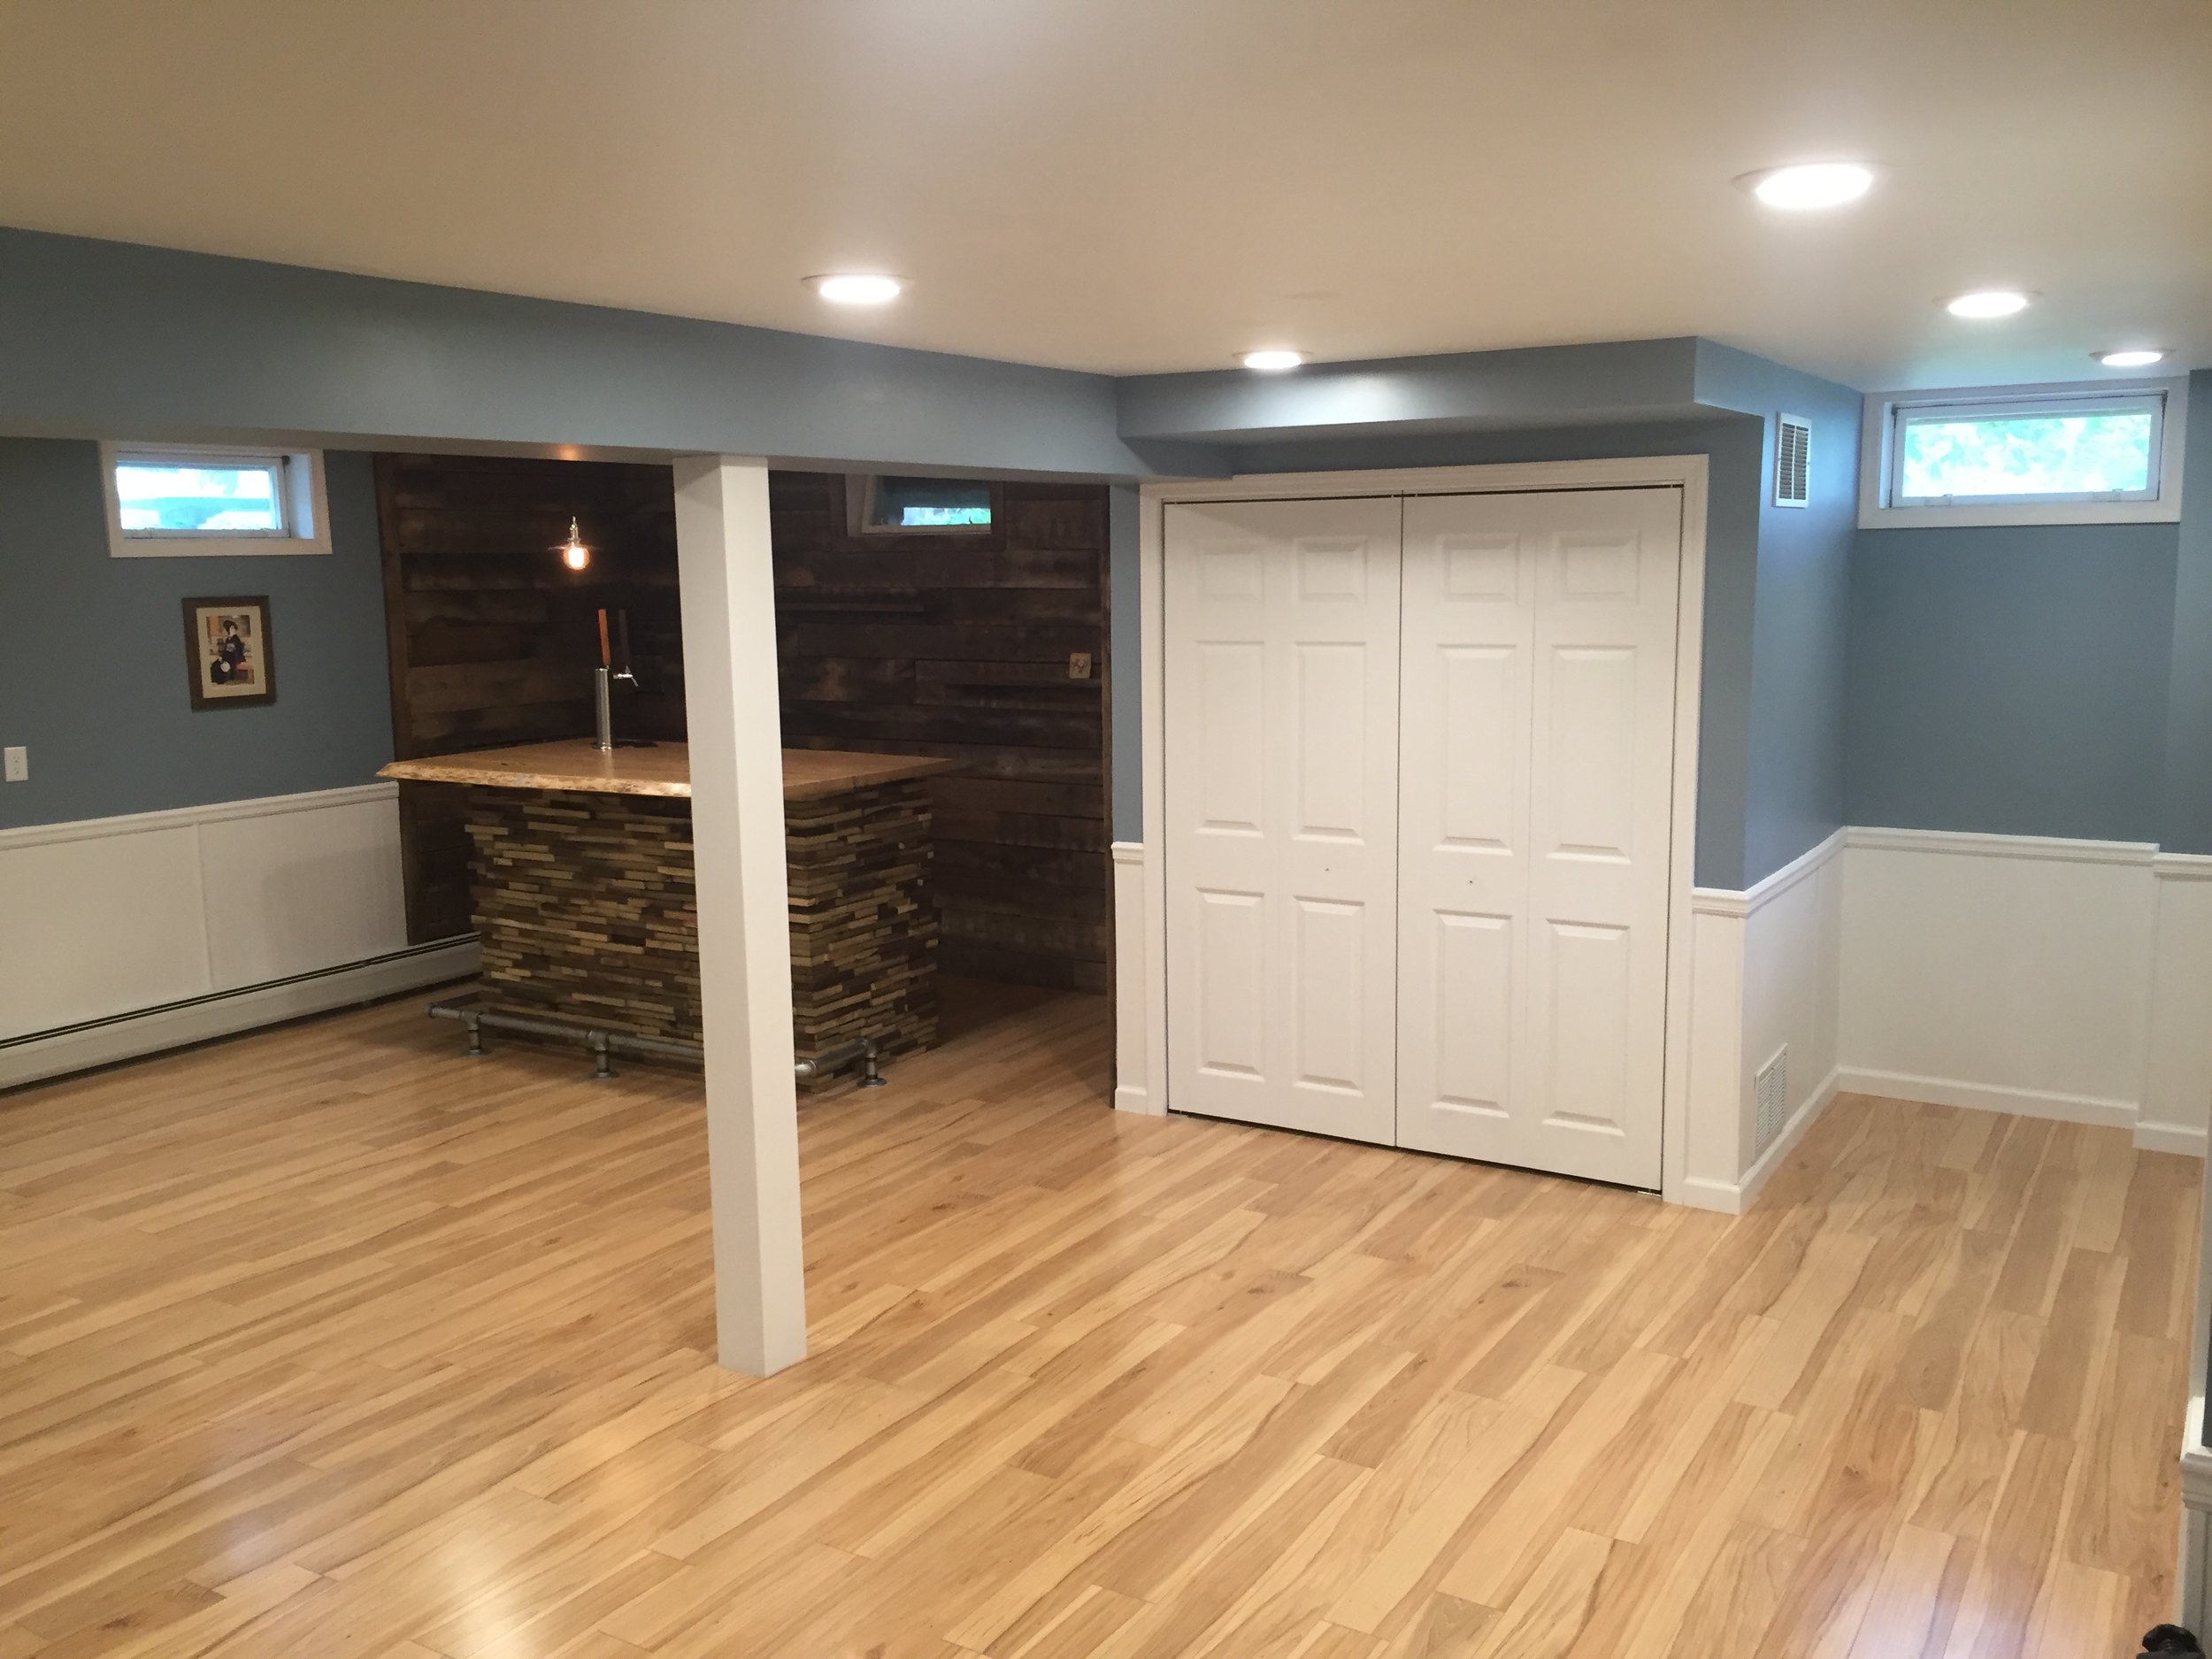  The basement remodel included custom closets, cabinetry, laundry area, a new floor as well as the bar corner. 